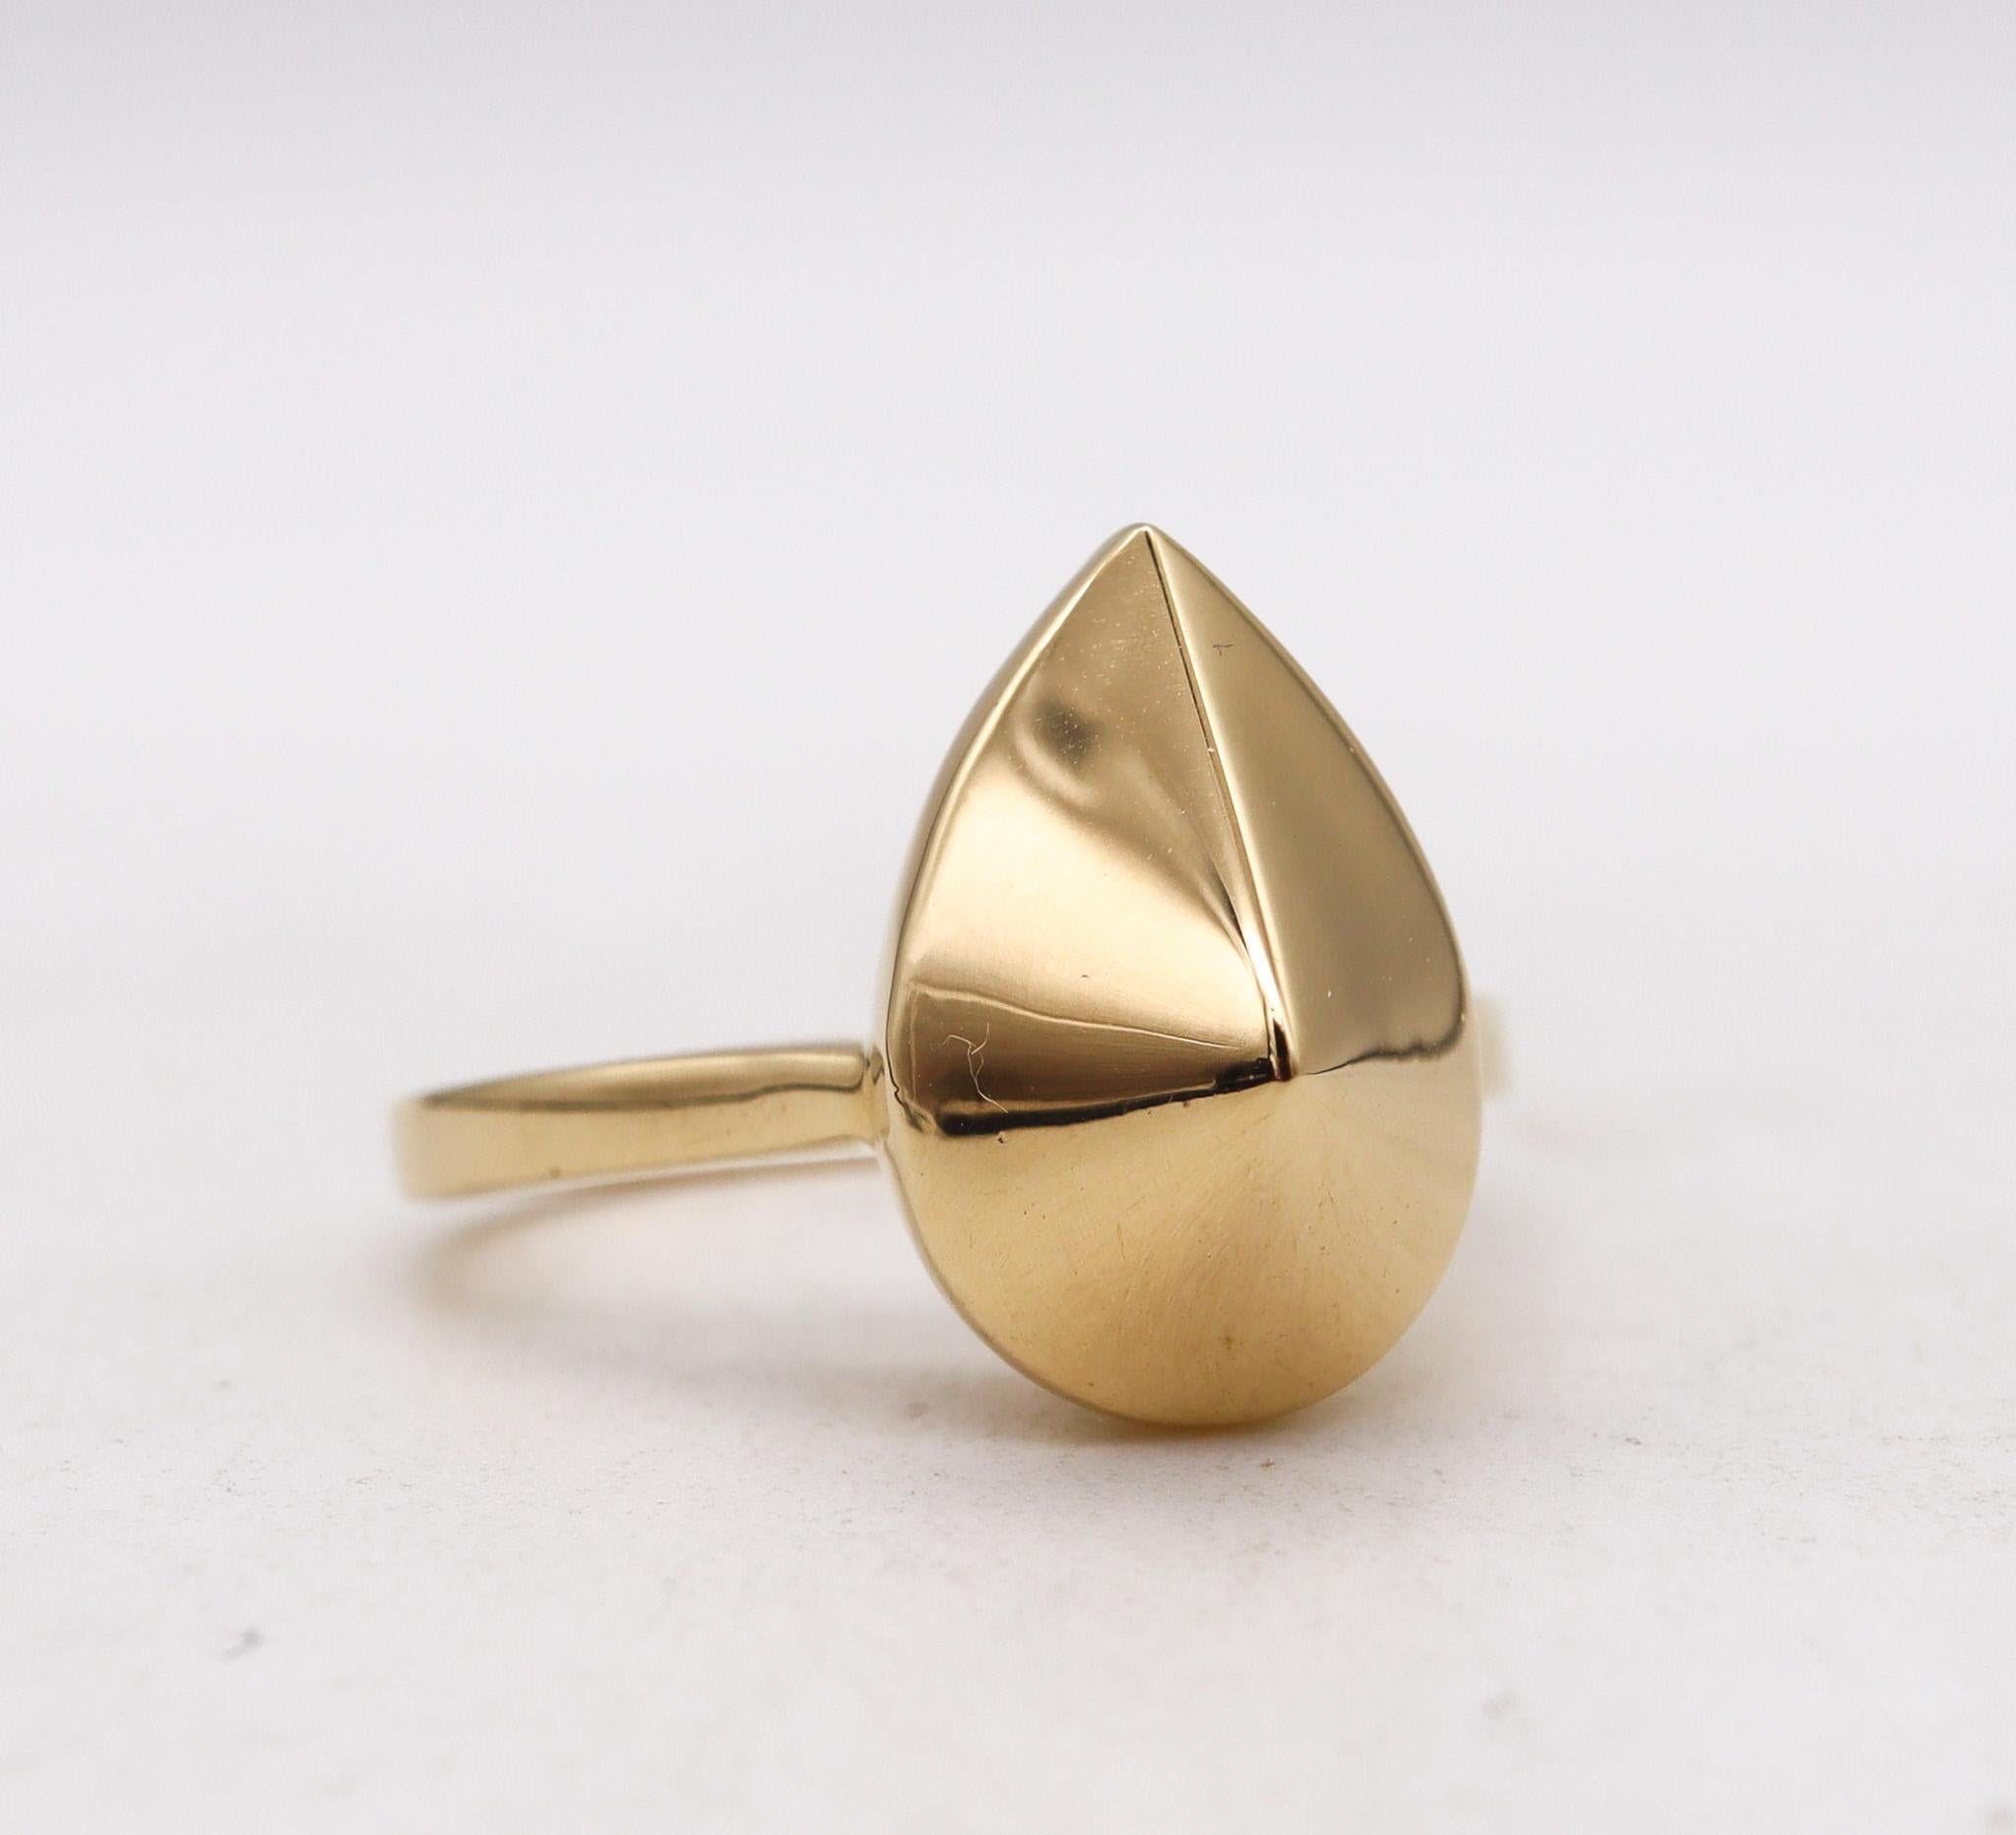 Stackable ring designed by the Aletto Brothers.

A contemporary stackable ring, created by the Italo-American jewelry designers Aletto Brothers. This ring has been masterfully crafted in solid yellow gold of 18 karats with high polished finish.